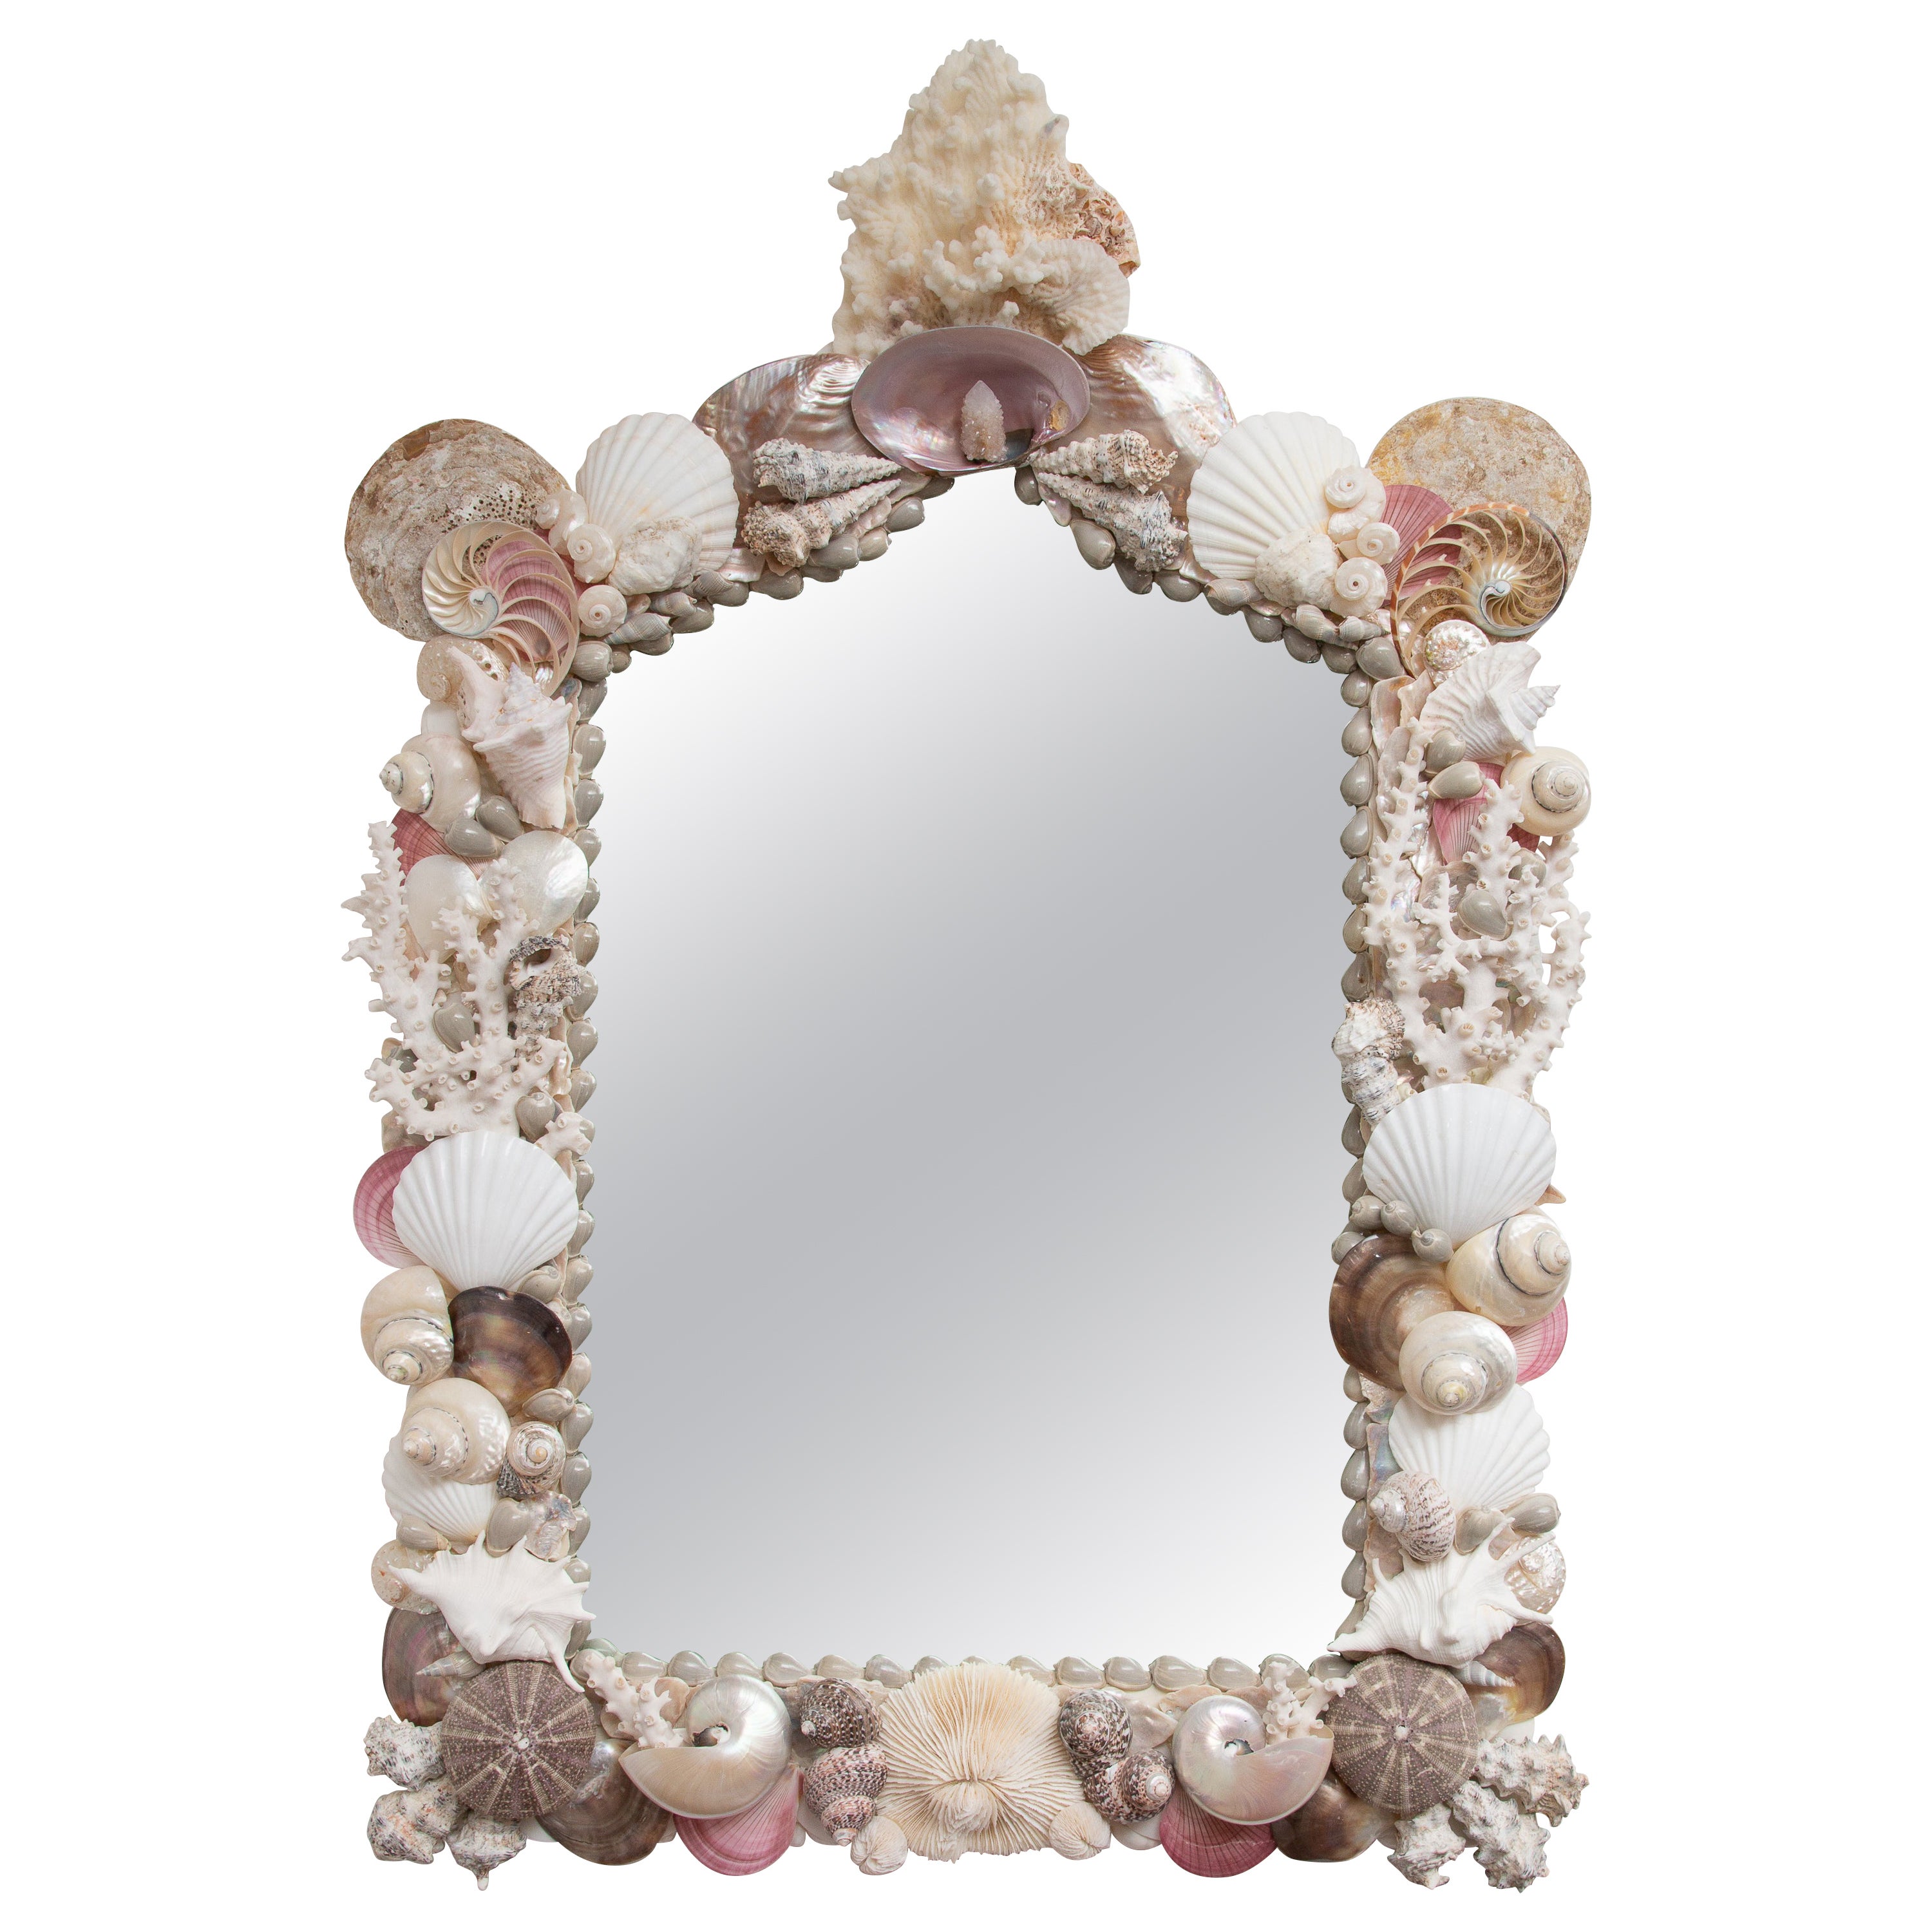 Fabulous Shell Encrusted Wall Mirror For Sale